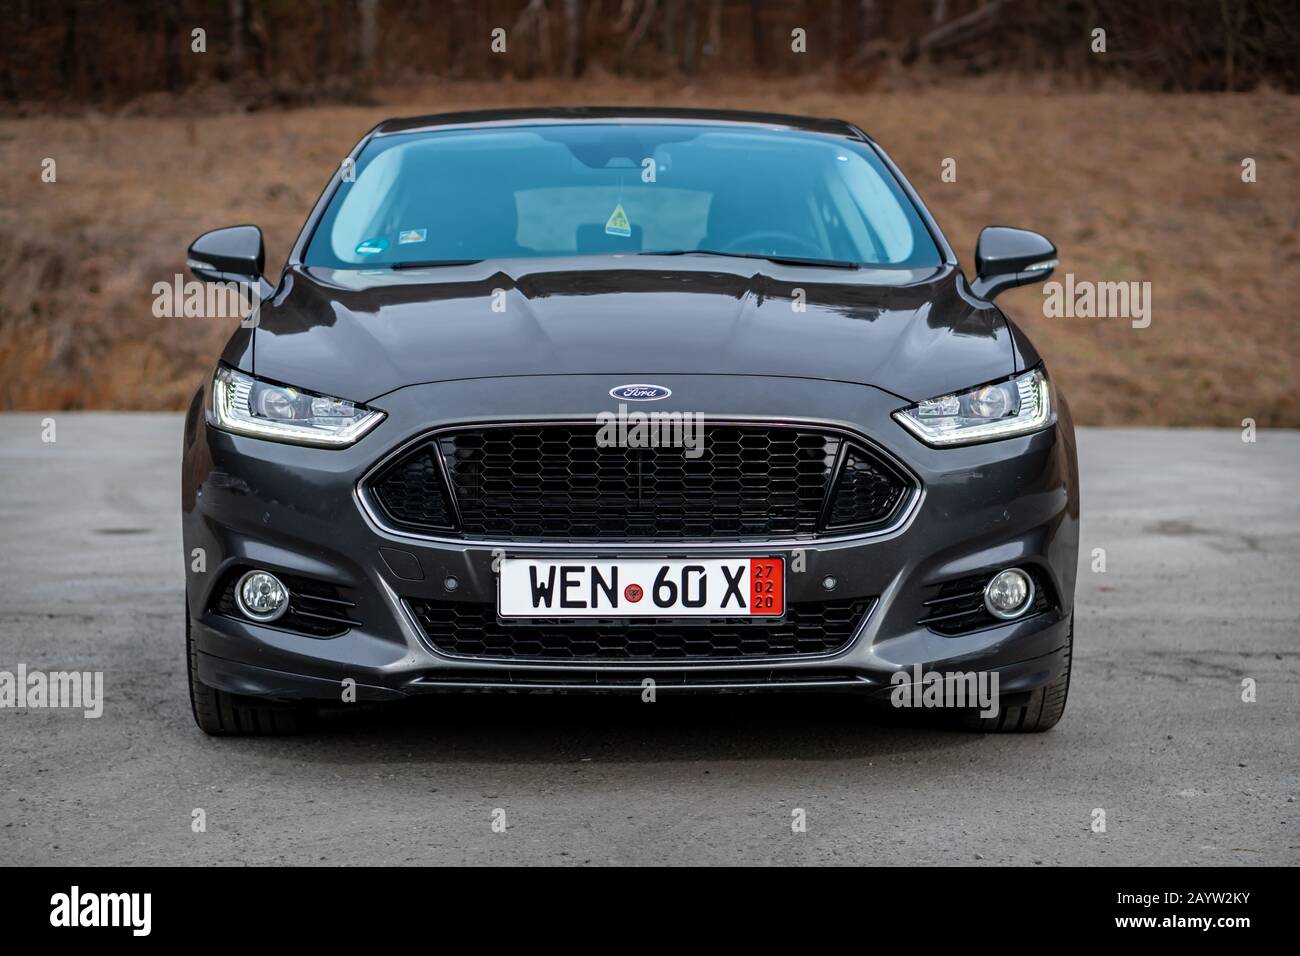 https://c8.alamy.com/comp/2AYW2KY/cluj-napocaclujromania-01312020-ford-mondeo-mk5-sport-edition-with-dynamic-led-headlights-sport-front-bumper-18-inch-alloy-wheels-aston-martin-2AYW2KY.jpg